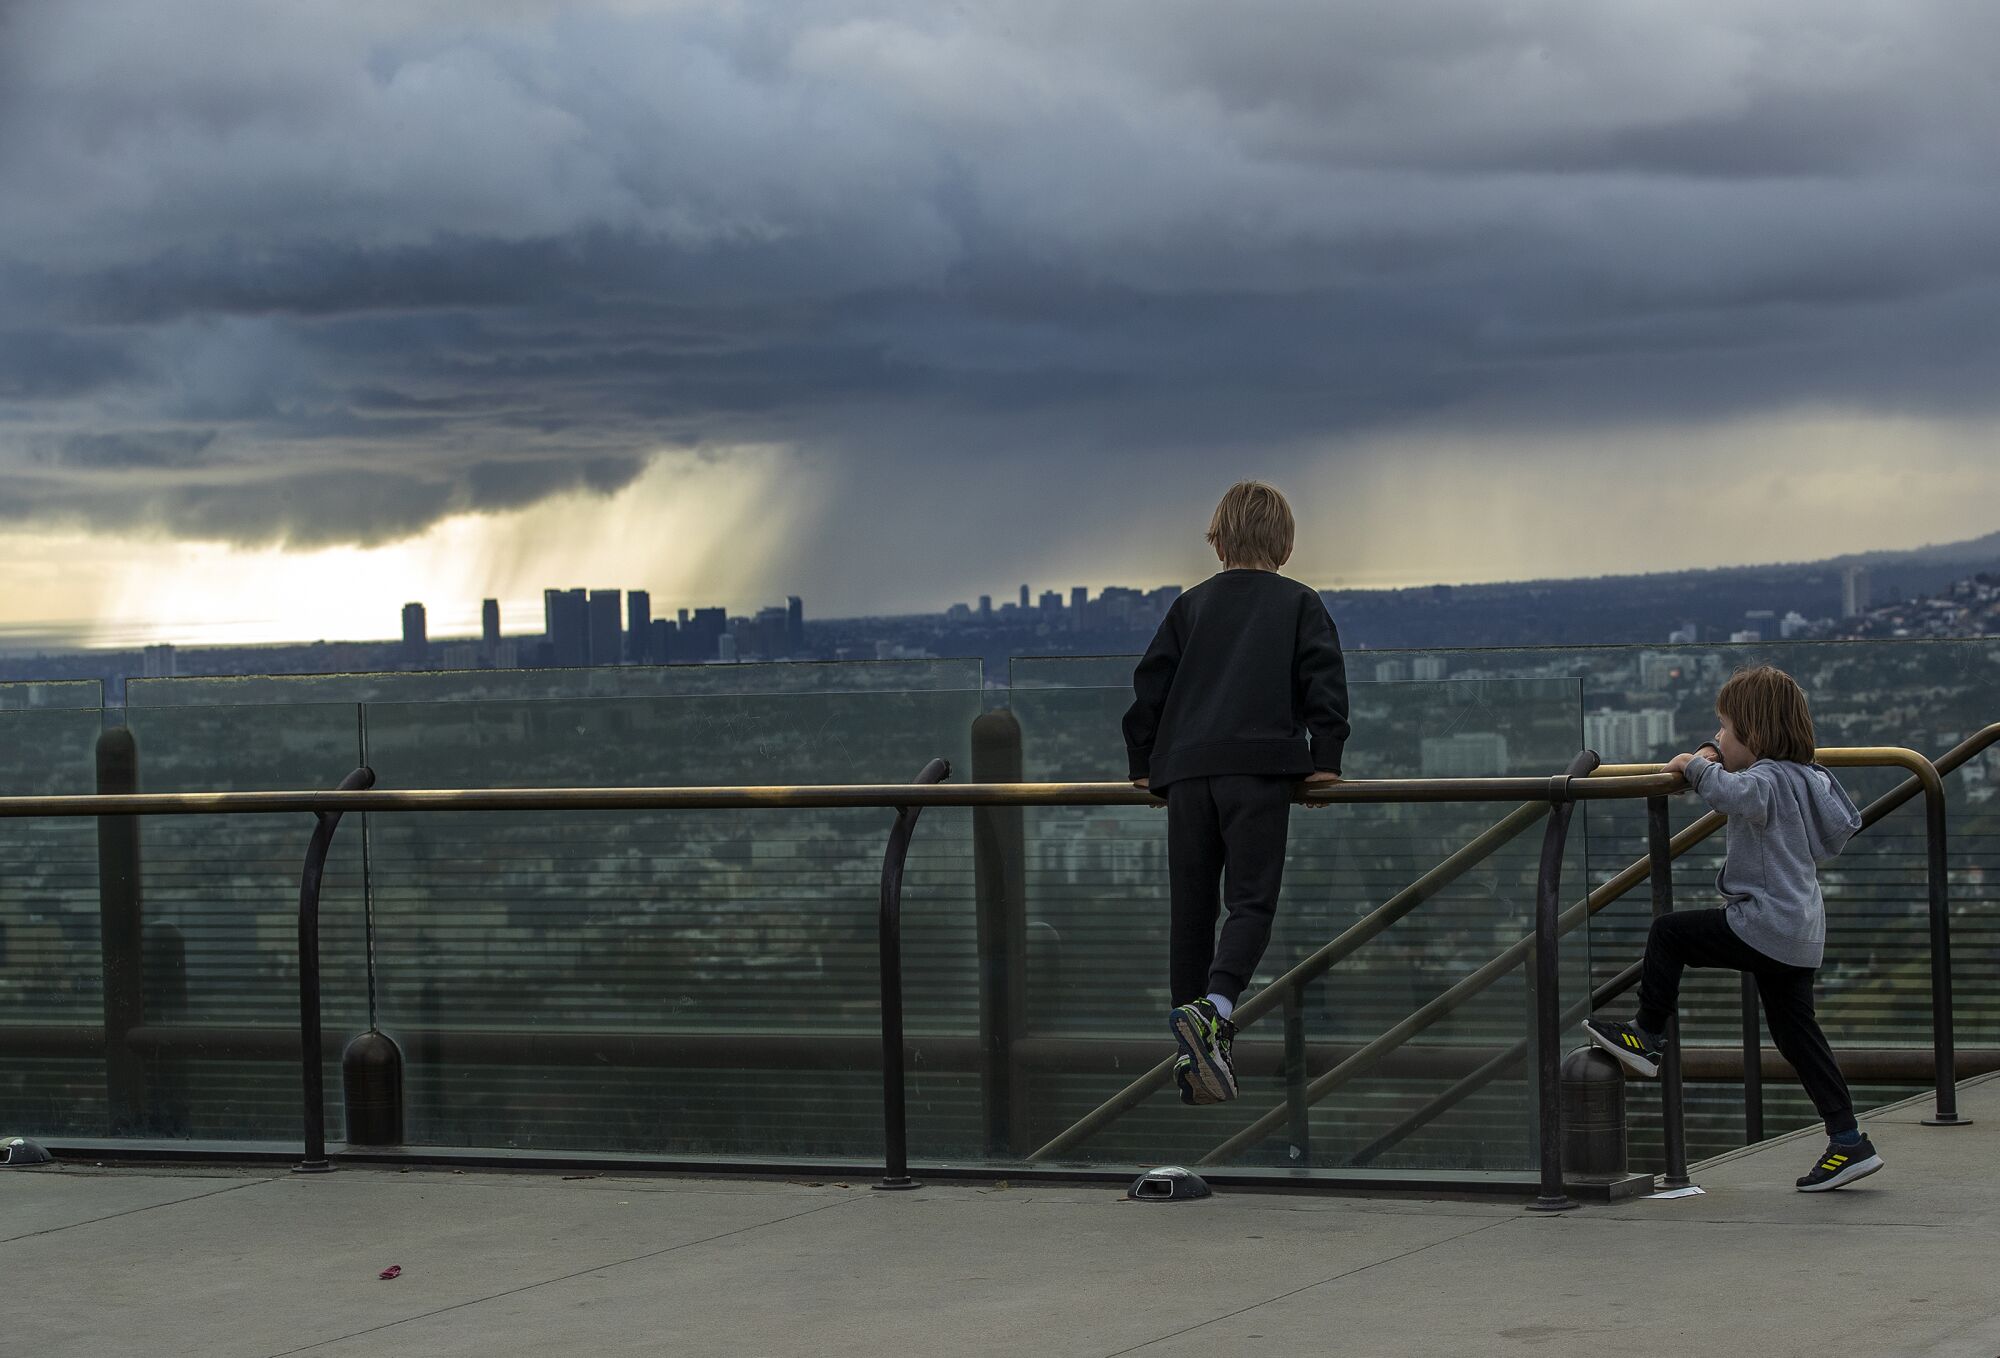 Two young boys climb along railing of a viewing platform. City is in the distance and dark clouds cover the sky.